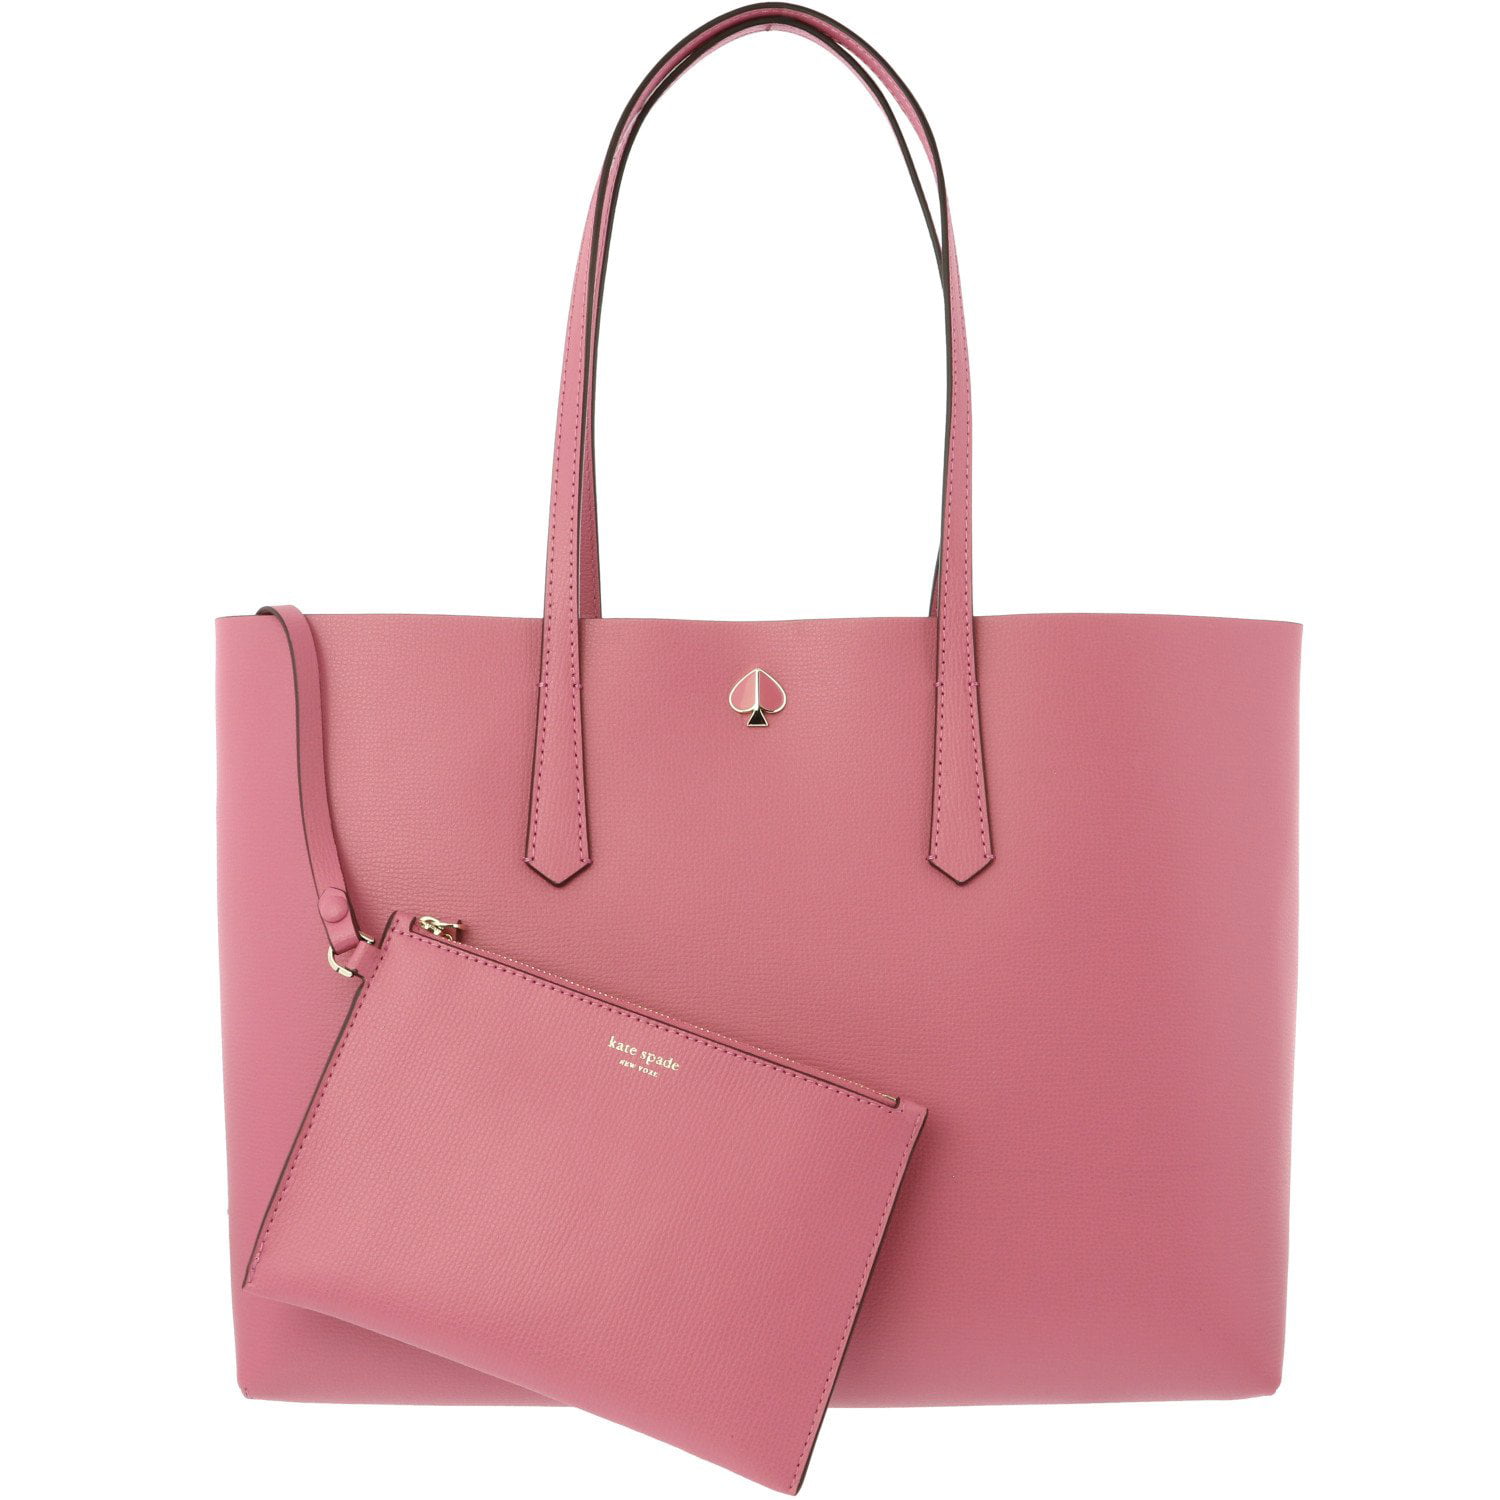 Kate Spade Women's Large Molly Tote Top-Handle Bag - Blustery Pink